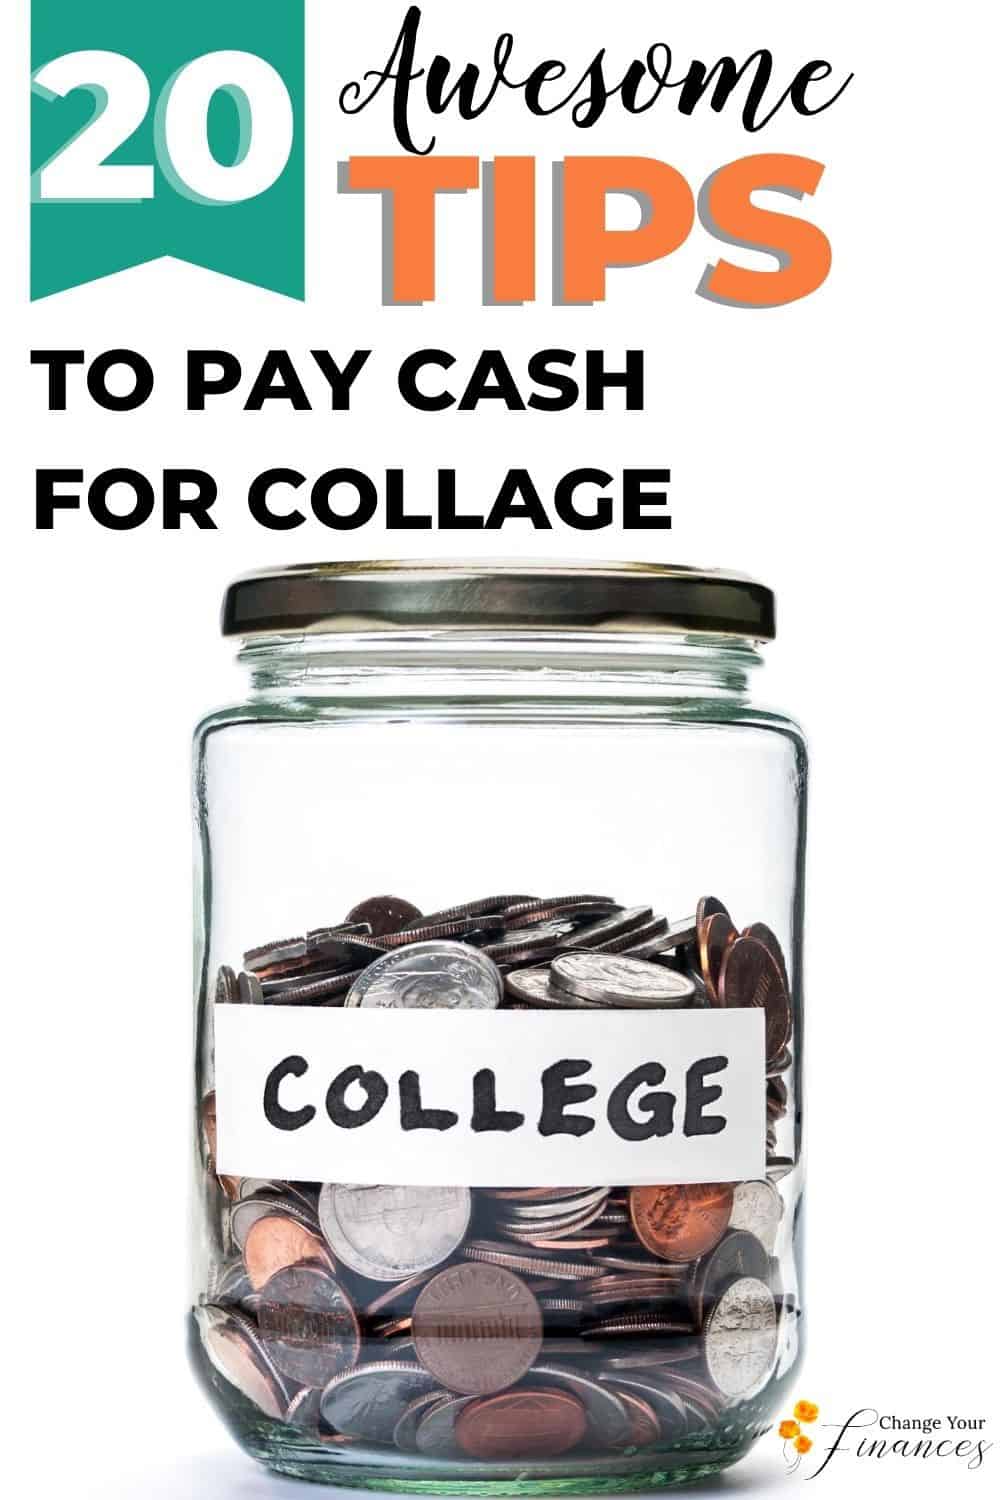 20 Tips How to Pay Cash for College that You Need to Know